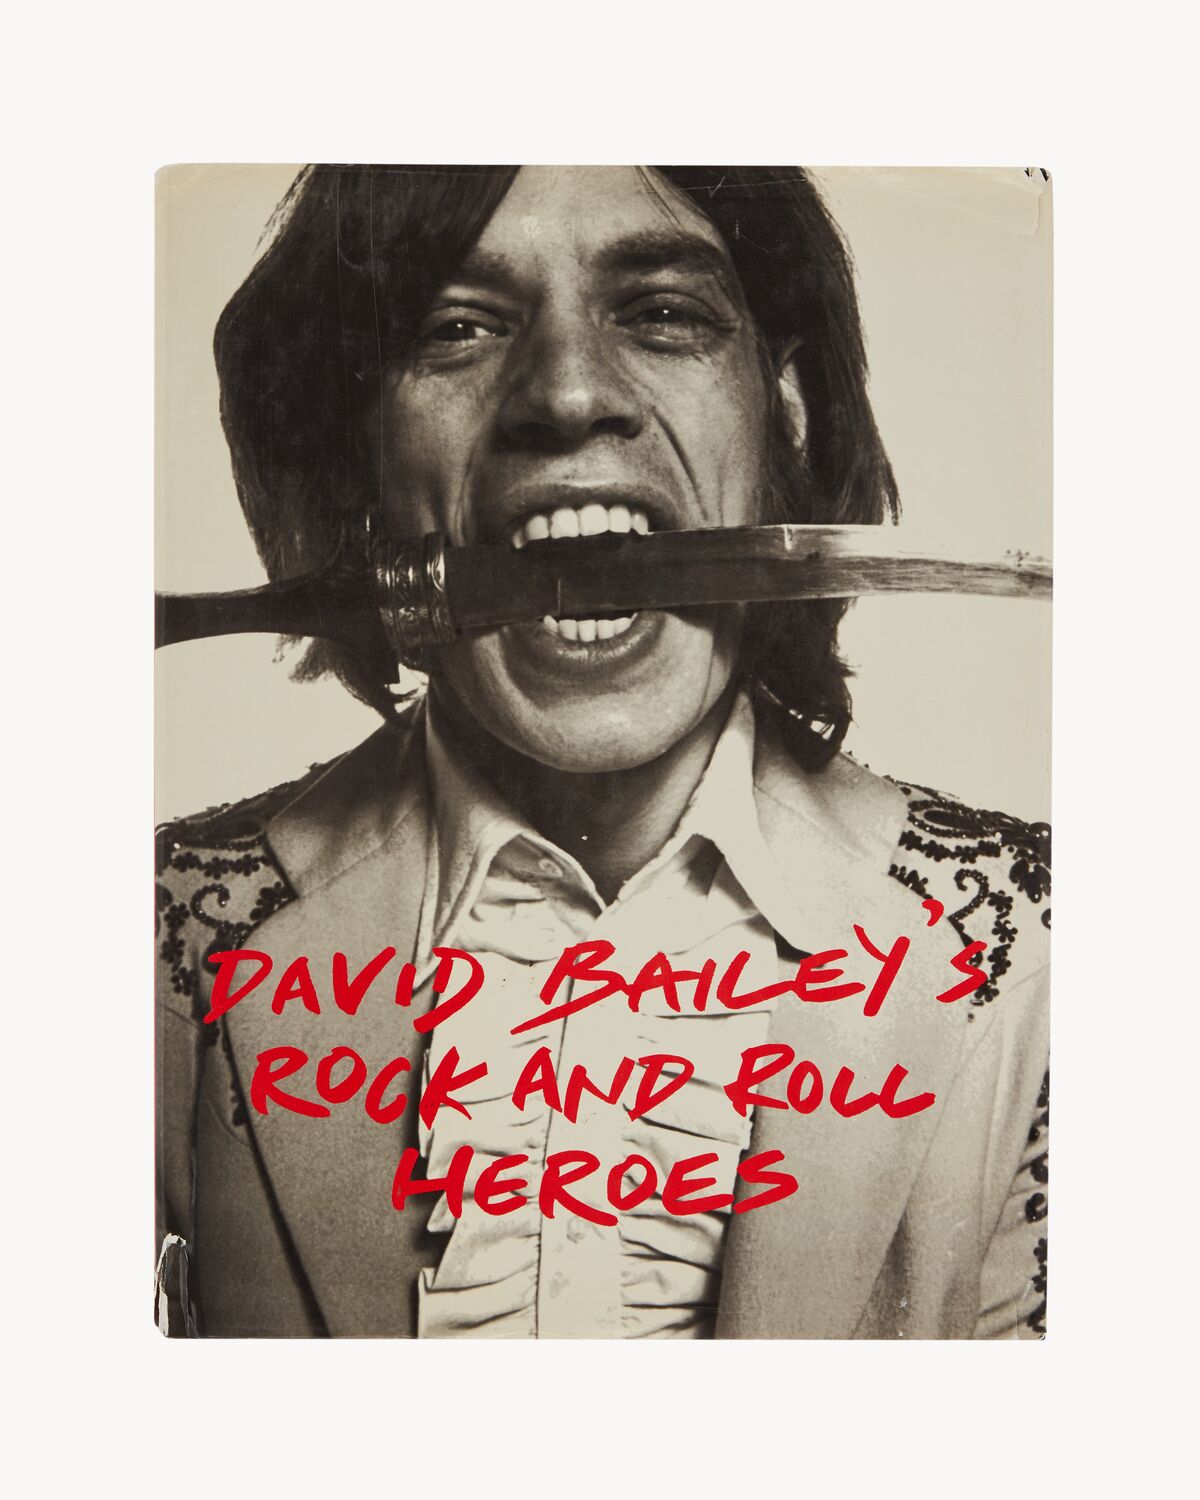 DAVID BAILEY'S ROCK AND ROLL HEROES